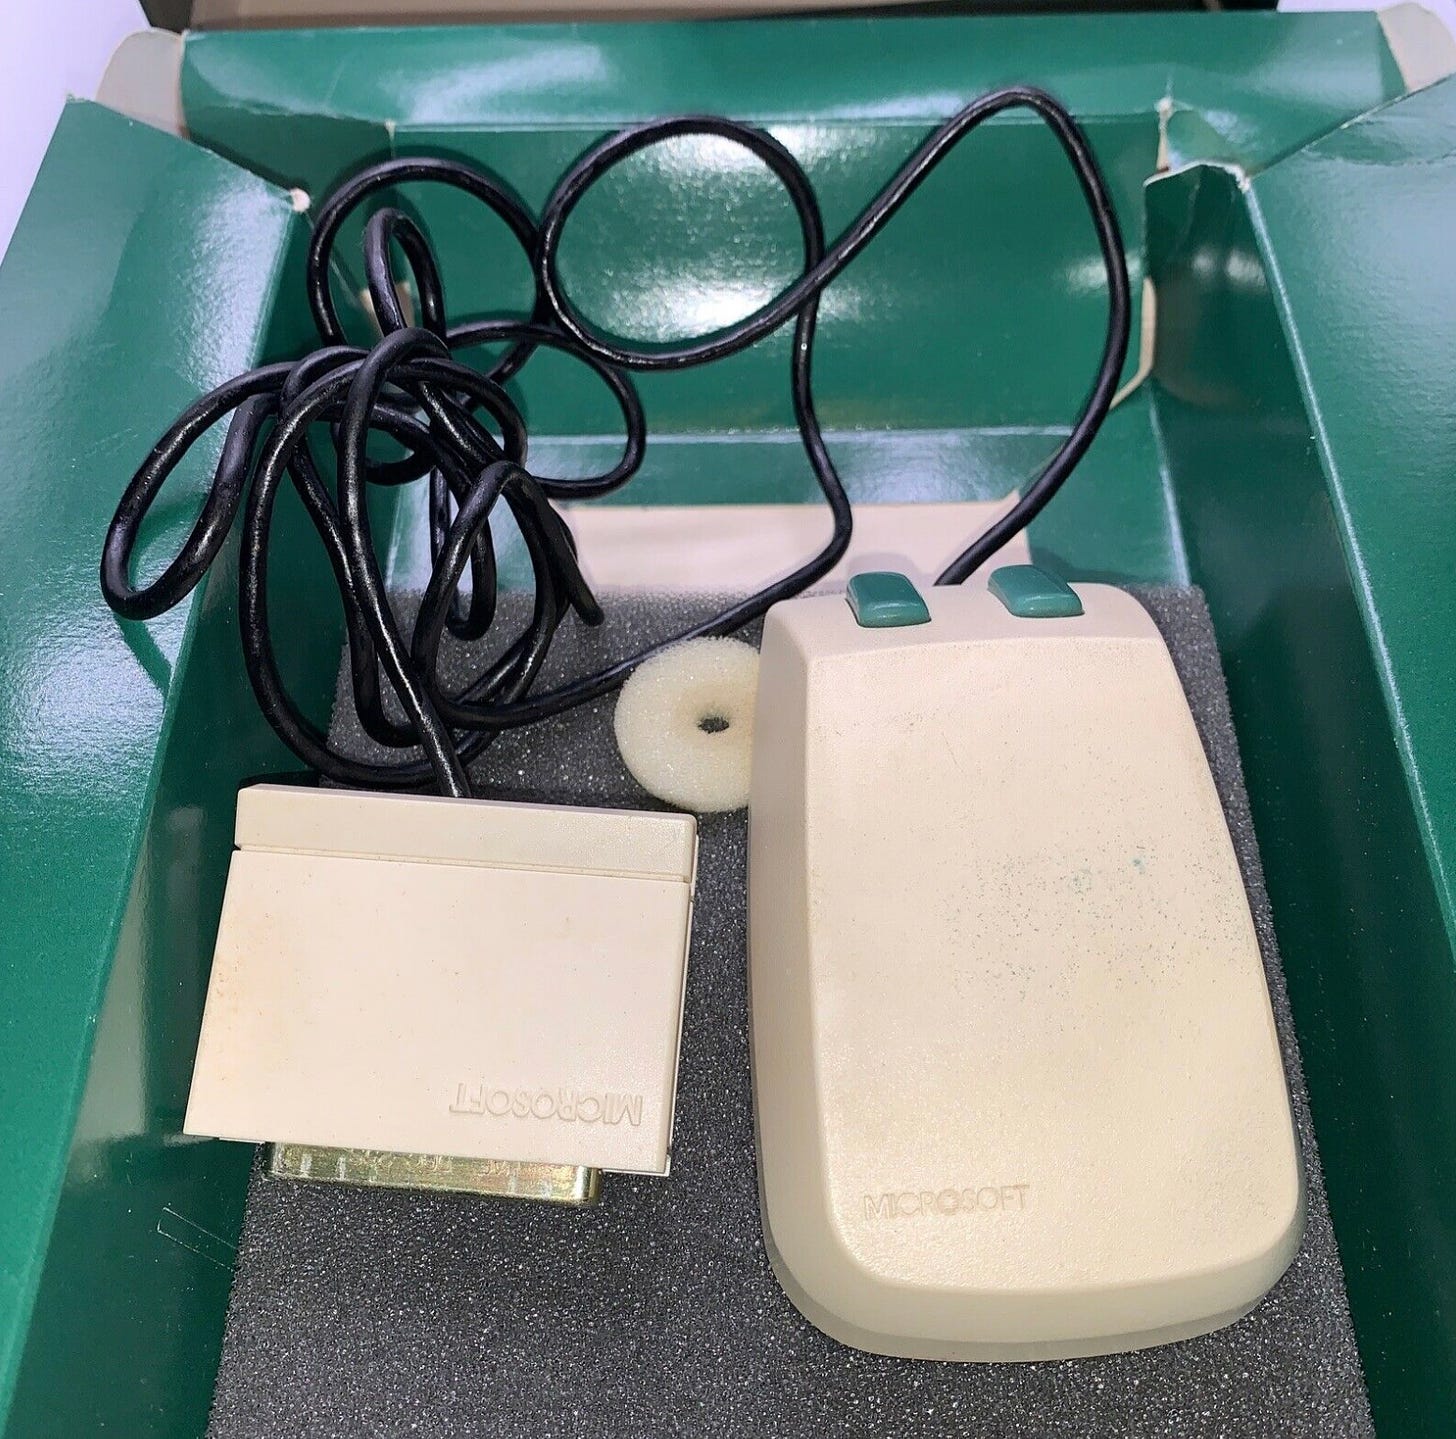 Photo of the original Microsoft Mouse in a box. It is called "green eyed" because it had two green buttons.